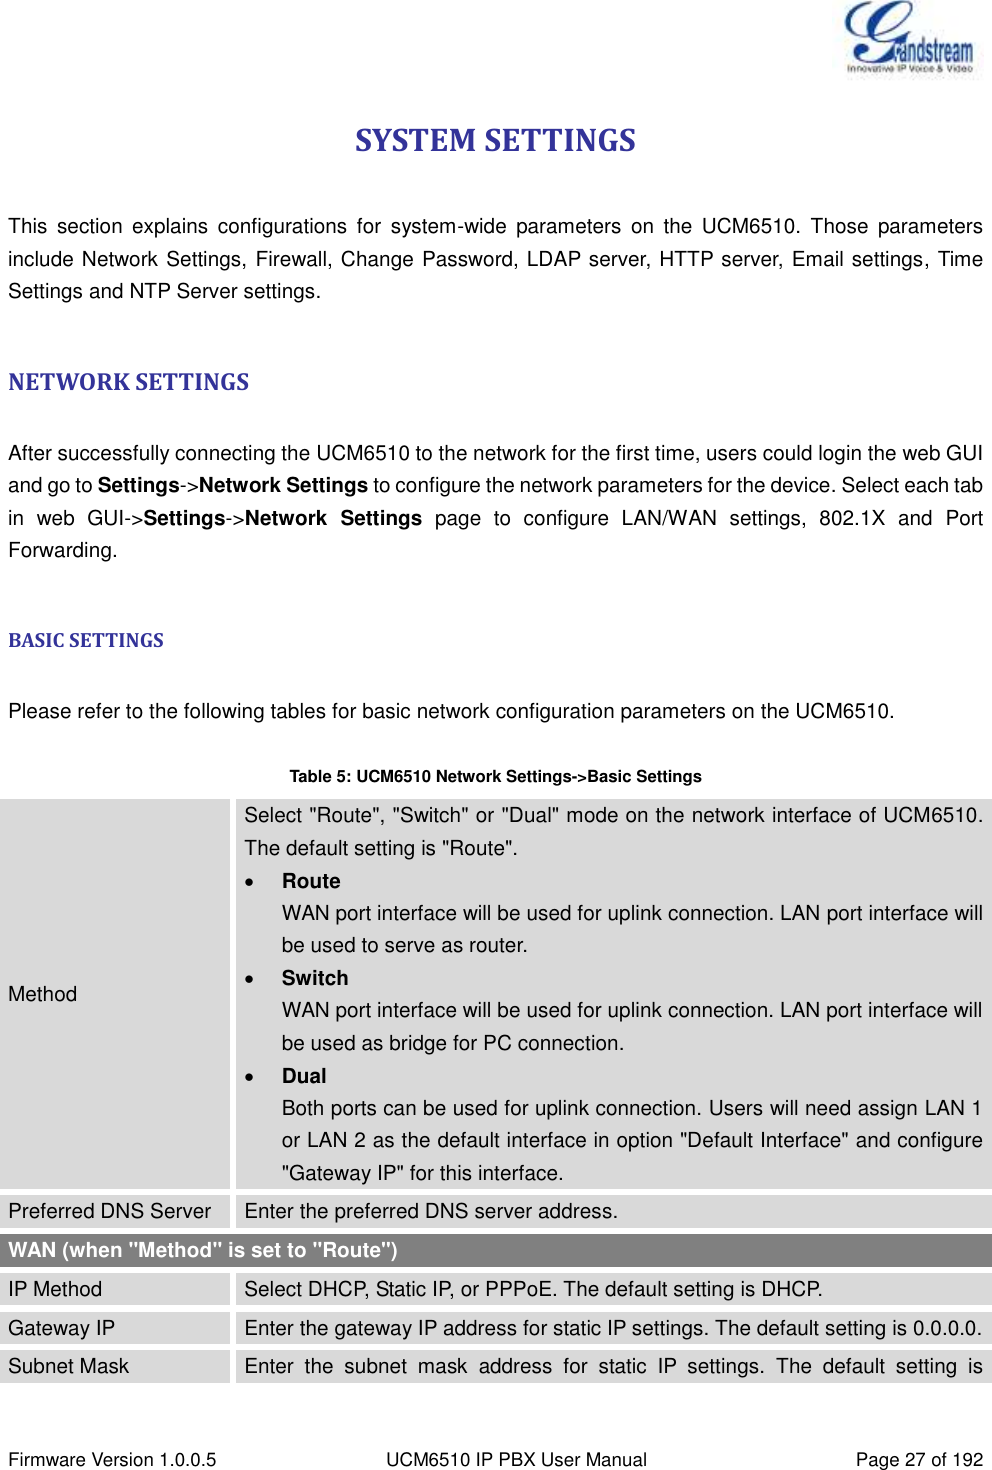  Firmware Version 1.0.0.5 UCM6510 IP PBX User Manual Page 27 of 192  SYSTEM SETTINGS  This  section  explains  configurations  for  system-wide  parameters  on  the  UCM6510.  Those  parameters include Network Settings, Firewall, Change Password, LDAP server, HTTP server, Email settings, Time Settings and NTP Server settings.  NETWORK SETTINGS  After successfully connecting the UCM6510 to the network for the first time, users could login the web GUI and go to Settings-&gt;Network Settings to configure the network parameters for the device. Select each tab in  web  GUI-&gt;Settings-&gt;Network  Settings  page  to  configure  LAN/WAN  settings,  802.1X  and  Port Forwarding.  BASIC SETTINGS  Please refer to the following tables for basic network configuration parameters on the UCM6510.  Table 5: UCM6510 Network Settings-&gt;Basic Settings Method Select &quot;Route&quot;, &quot;Switch&quot; or &quot;Dual&quot; mode on the network interface of UCM6510. The default setting is &quot;Route&quot;.  Route WAN port interface will be used for uplink connection. LAN port interface will be used to serve as router.  Switch WAN port interface will be used for uplink connection. LAN port interface will be used as bridge for PC connection.  Dual Both ports can be used for uplink connection. Users will need assign LAN 1 or LAN 2 as the default interface in option &quot;Default Interface&quot; and configure &quot;Gateway IP&quot; for this interface. Preferred DNS Server Enter the preferred DNS server address. WAN (when &quot;Method&quot; is set to &quot;Route&quot;) IP Method Select DHCP, Static IP, or PPPoE. The default setting is DHCP. Gateway IP Enter the gateway IP address for static IP settings. The default setting is 0.0.0.0. Subnet Mask Enter  the  subnet  mask  address  for  static  IP  settings.  The  default  setting  is 